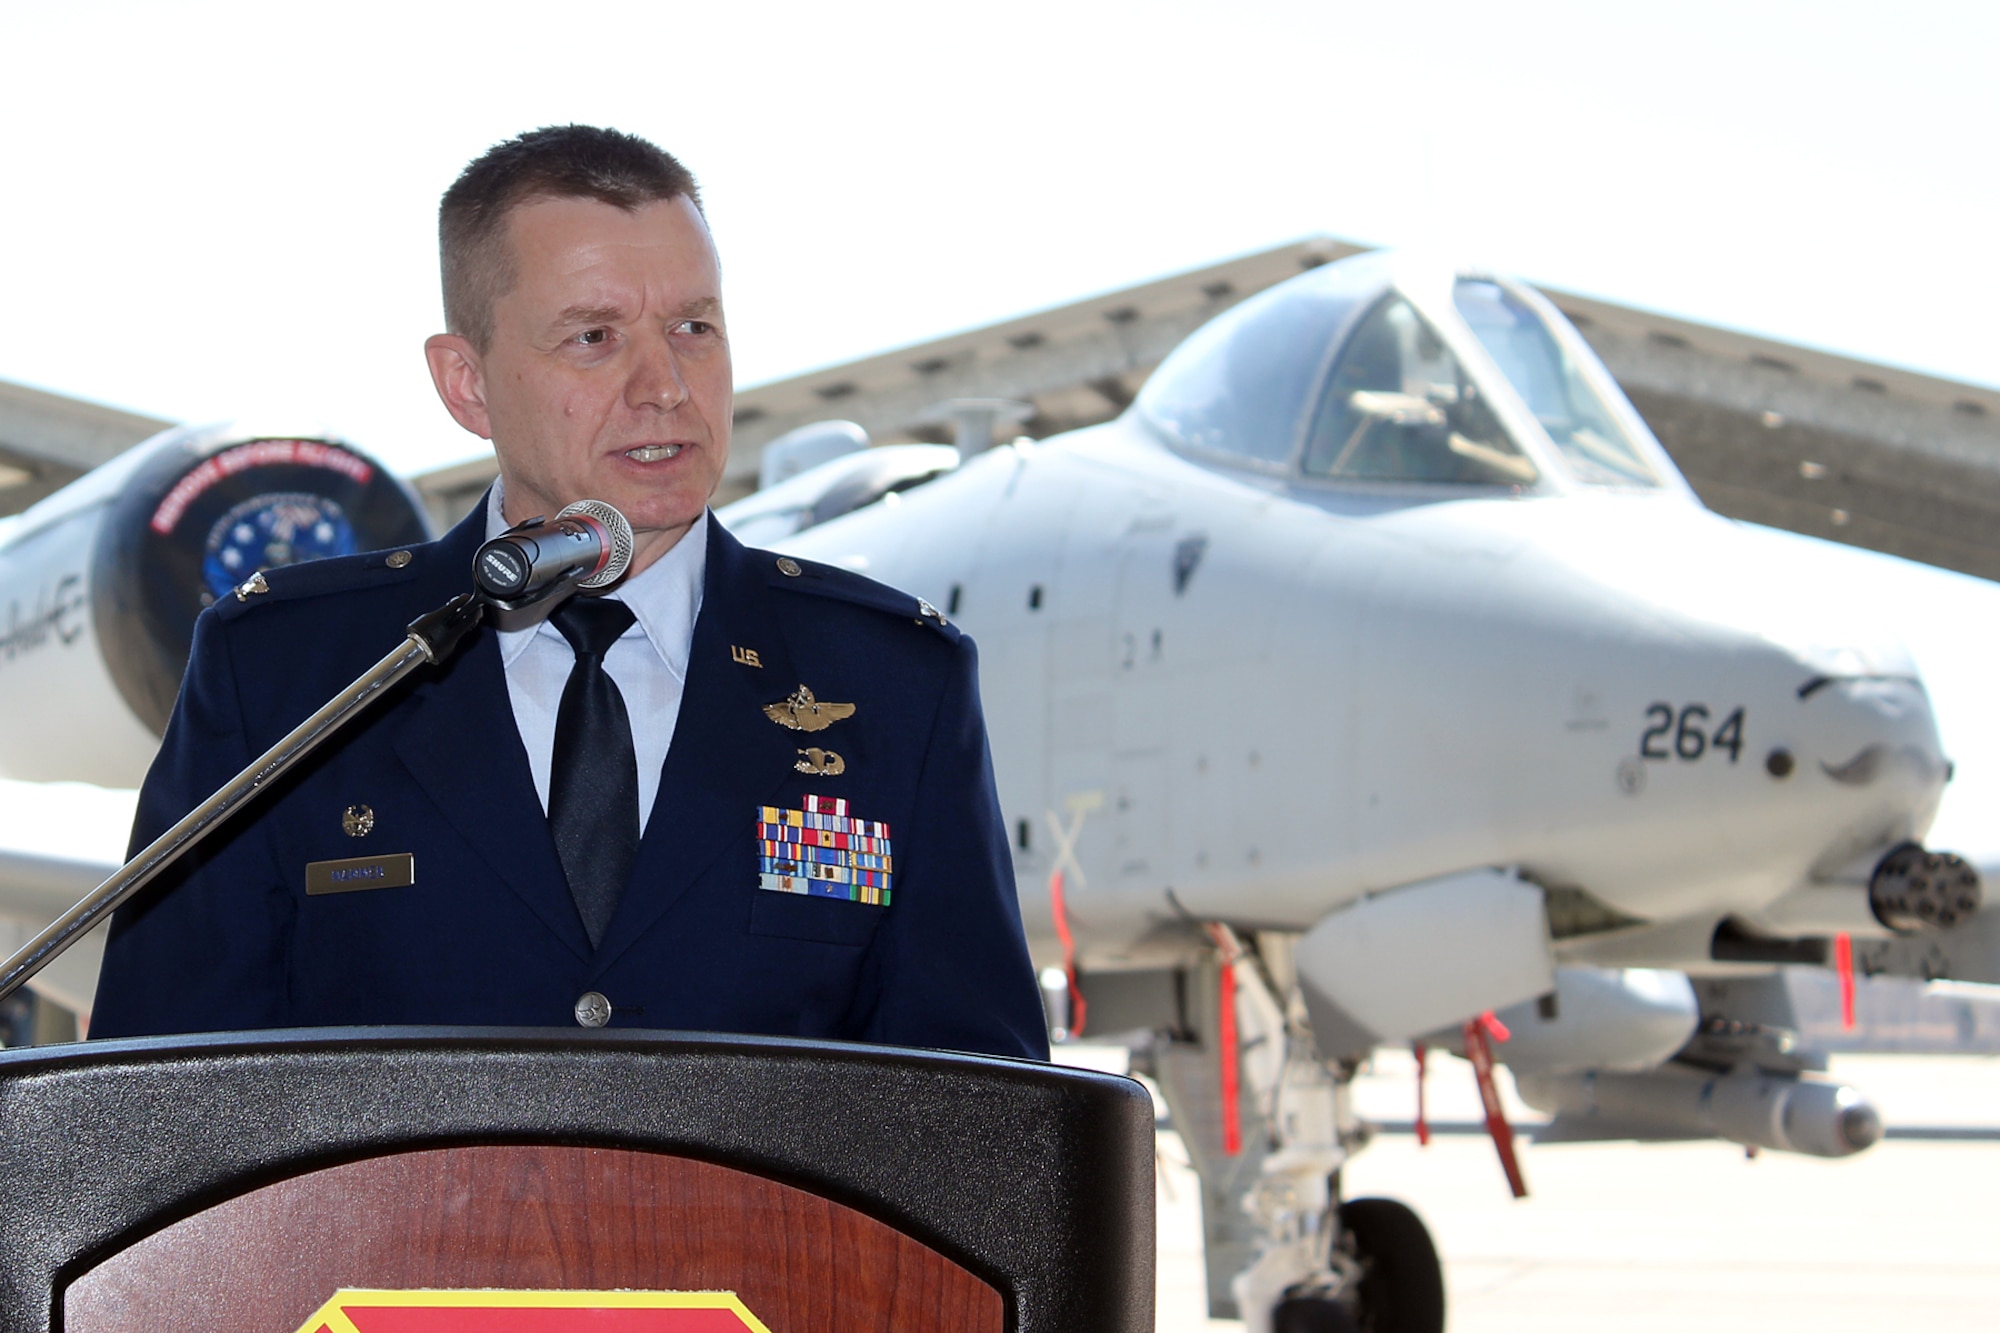 Col. Rolf Mammen addresses the 127th Maintenance Group for the final time shortly before formally relinquishing command of the Group to Lt. Col. David Spehar in a change of command ceremony at Selfridge Air National Guard Base, Mich., April 16, 2017. The Group maintains the A-10 Thunderbolt II aircraft at Selfridge. (U.S. Air National Guard photos by Tech. Sgt. Dan Heaton)